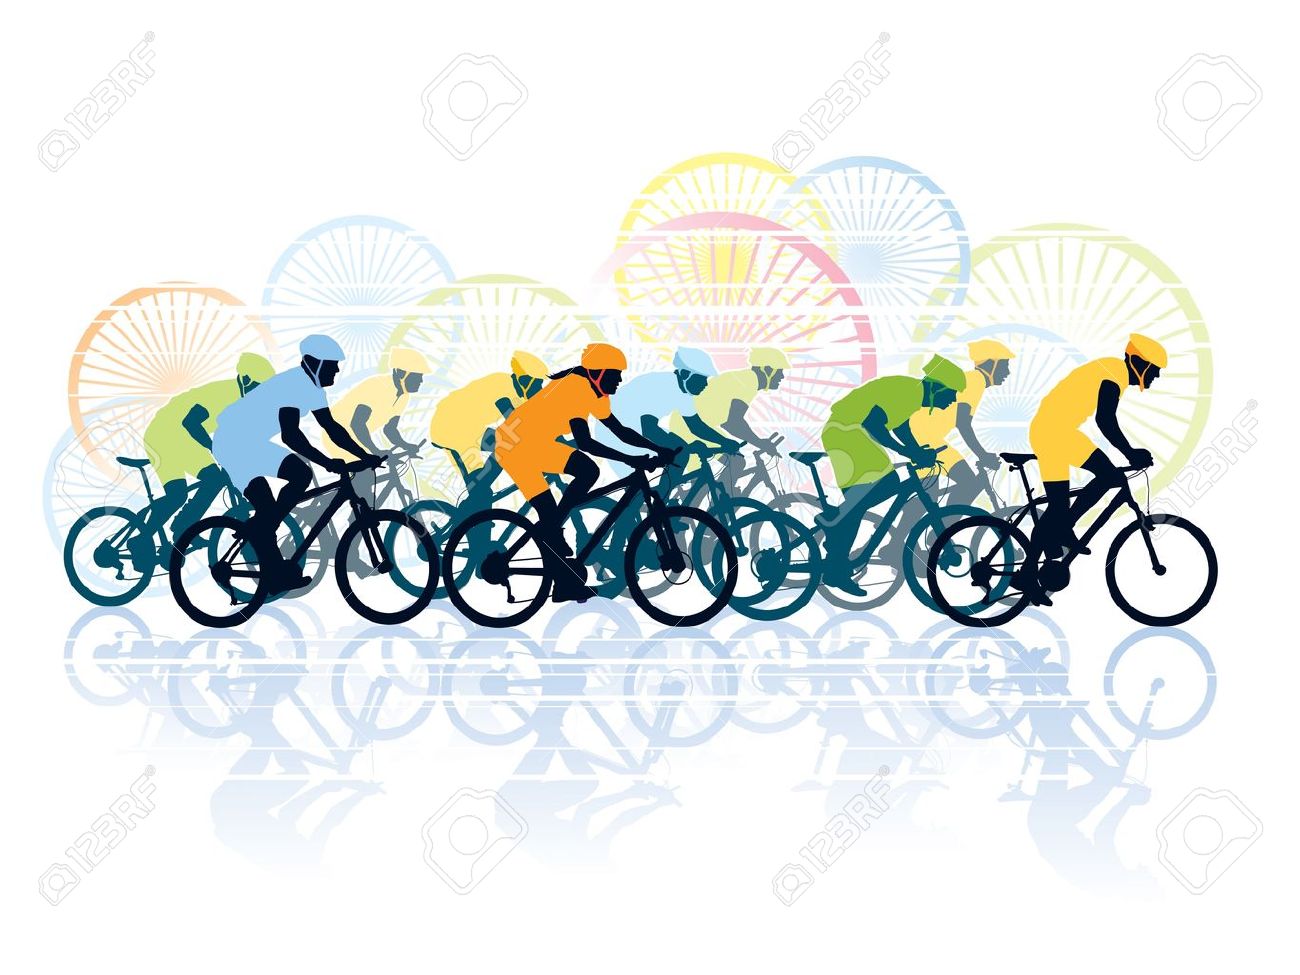 Cycle race clipart 12 » Clipart Station.